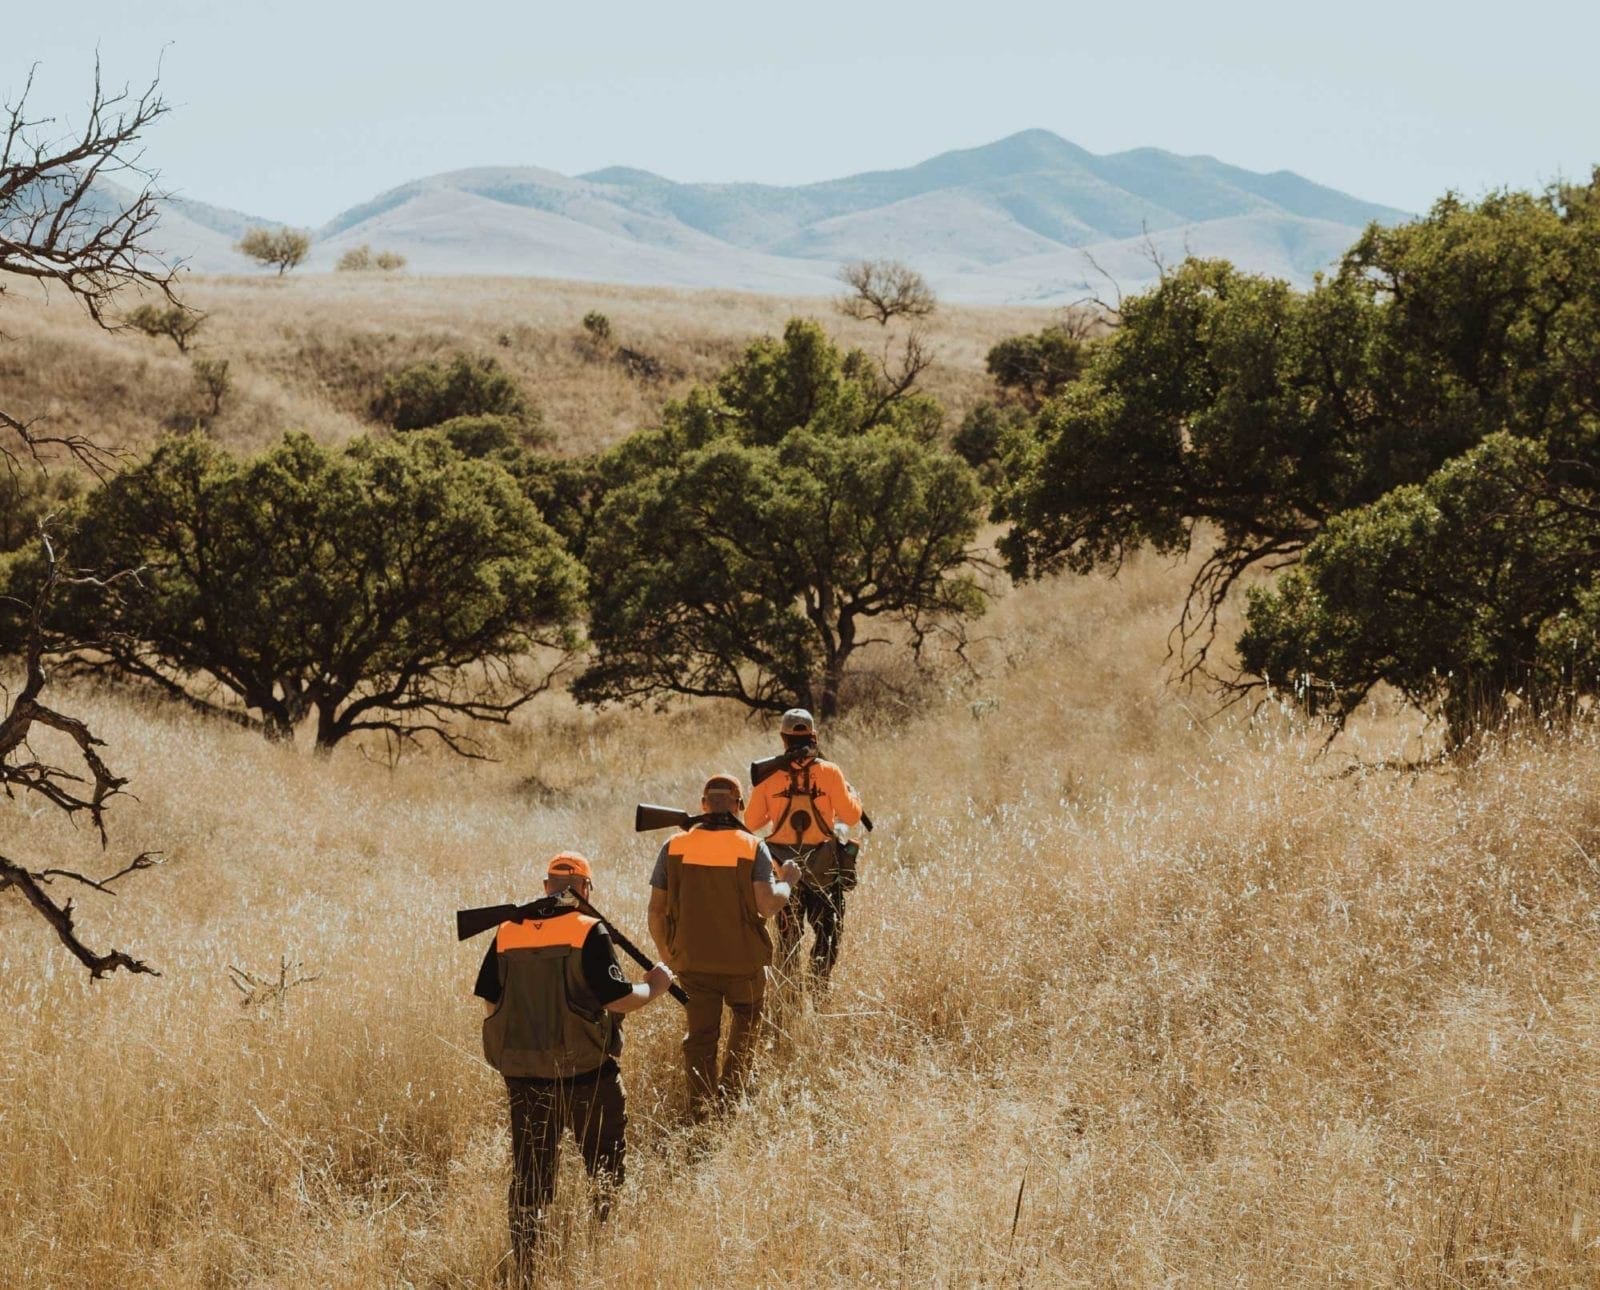 A group of bird hunters walking on federal public lands.